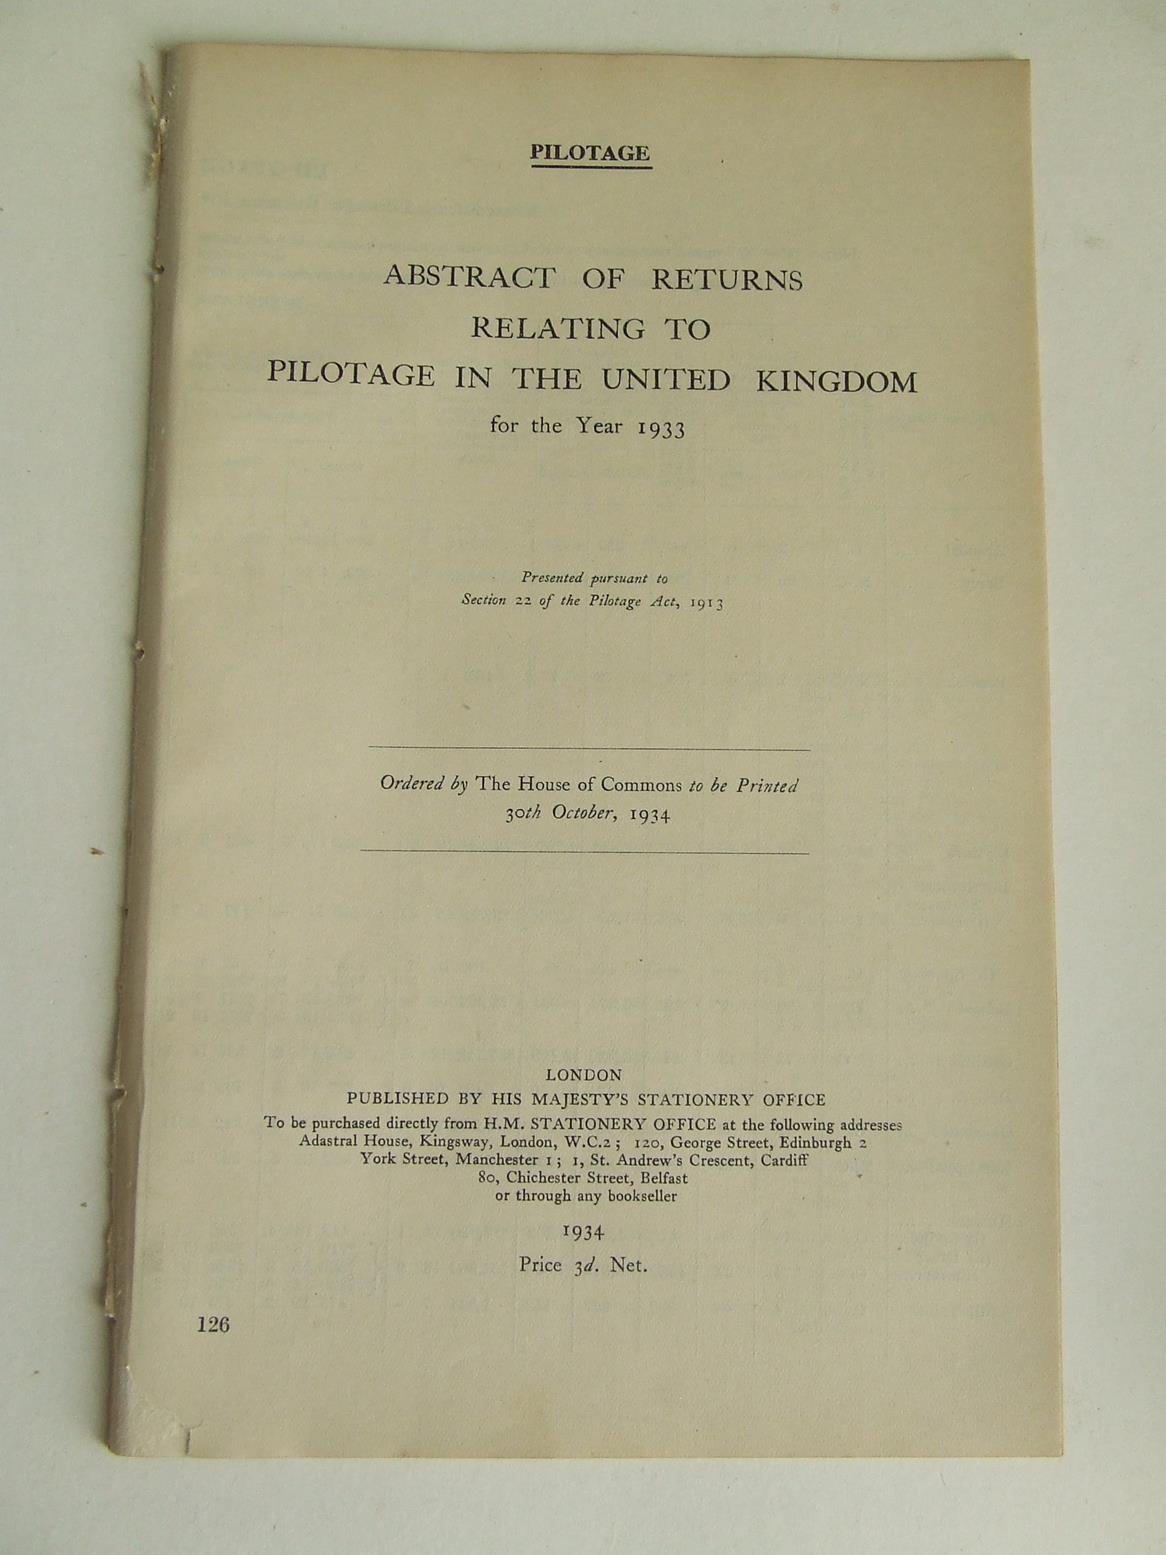 Abstract of Returns Relating to Pilots and Pilotage in the United Kingdom for the year 1933